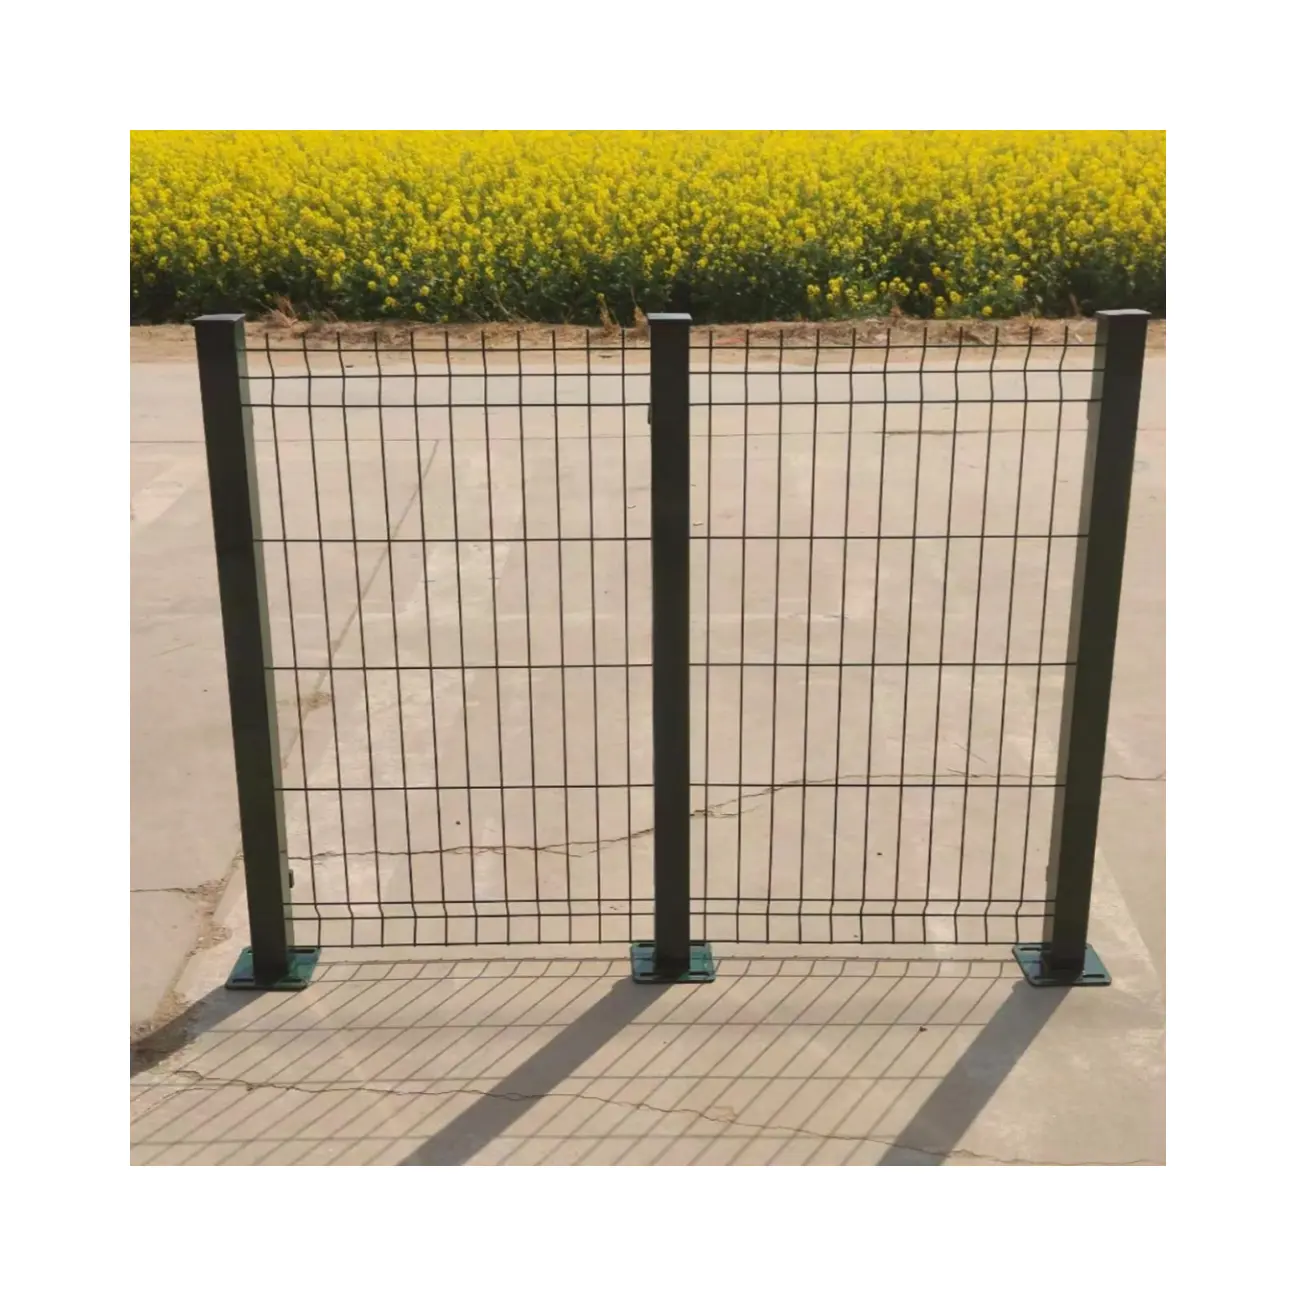 Sell well Friendly fence designs PVC coated 3D curved welded wire mesh fence for sale